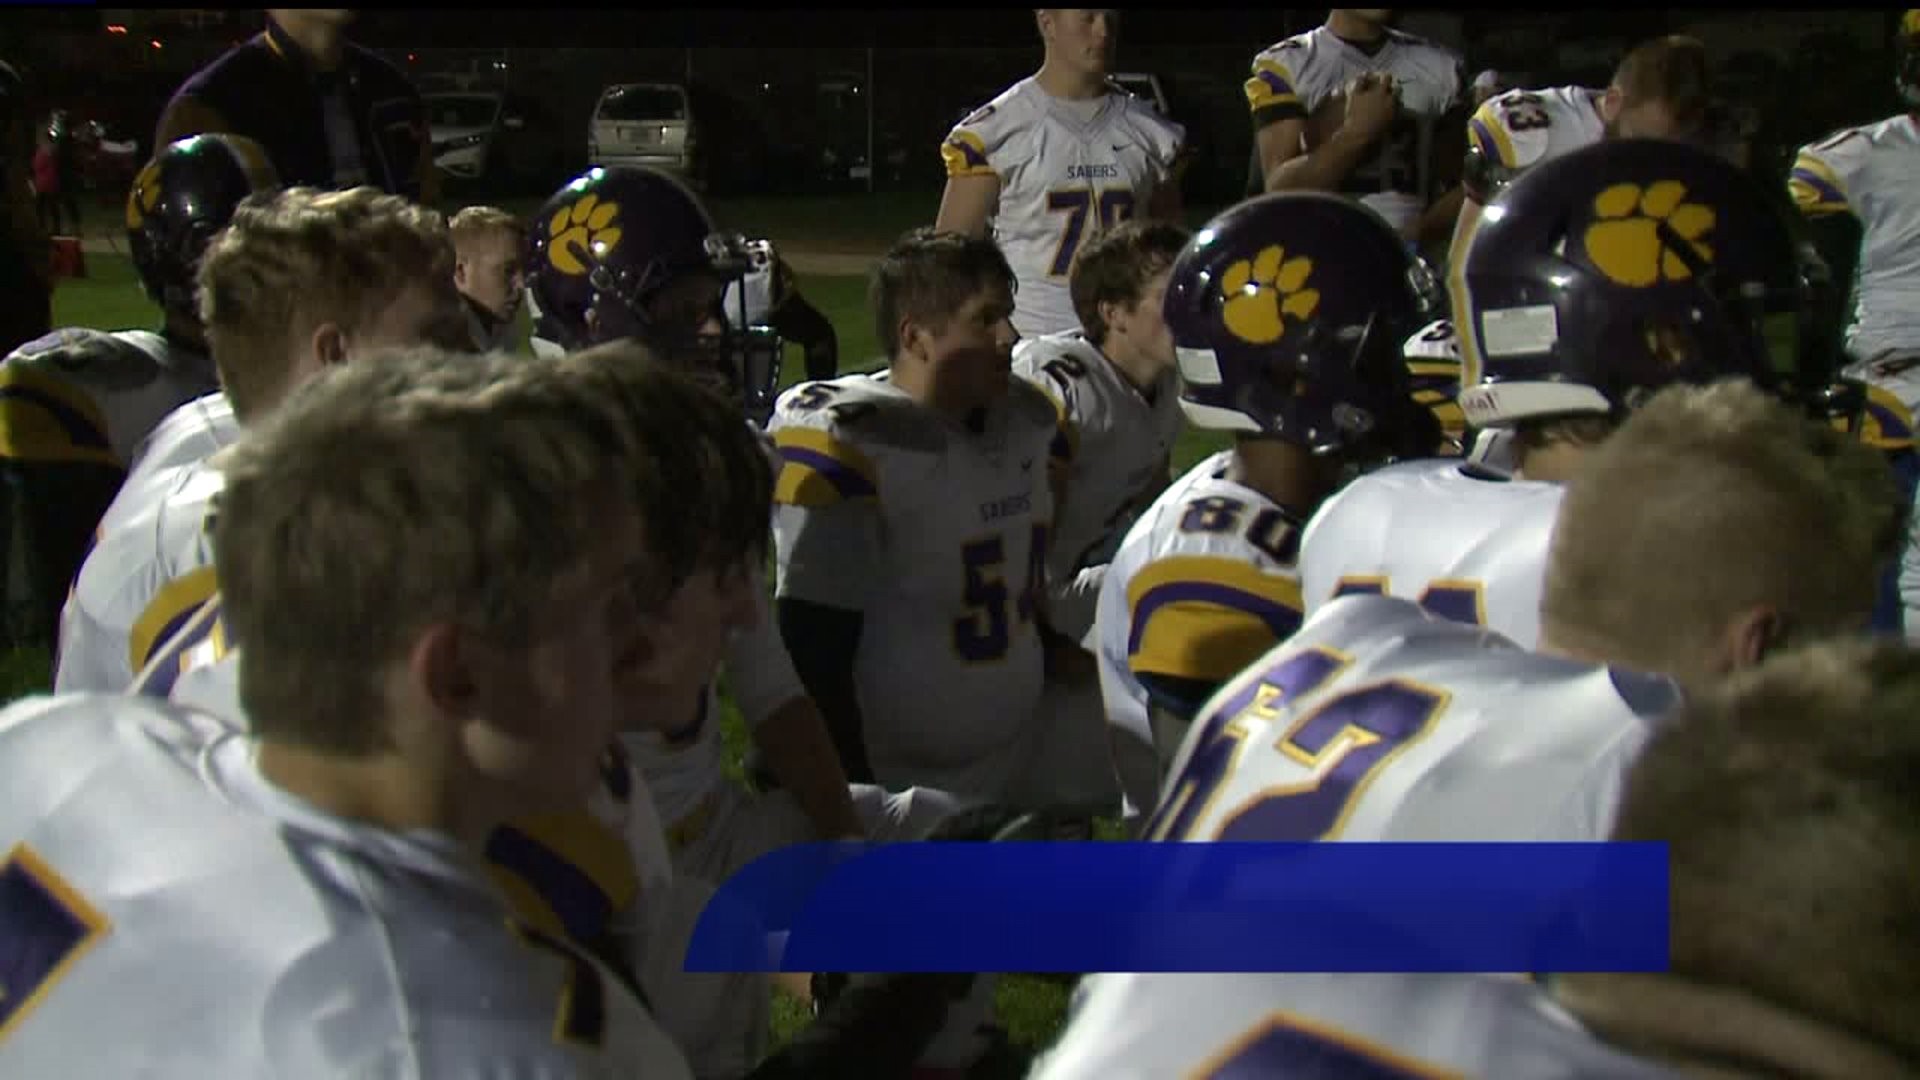 Mike Miller steps down as football coach at Central DeWitt